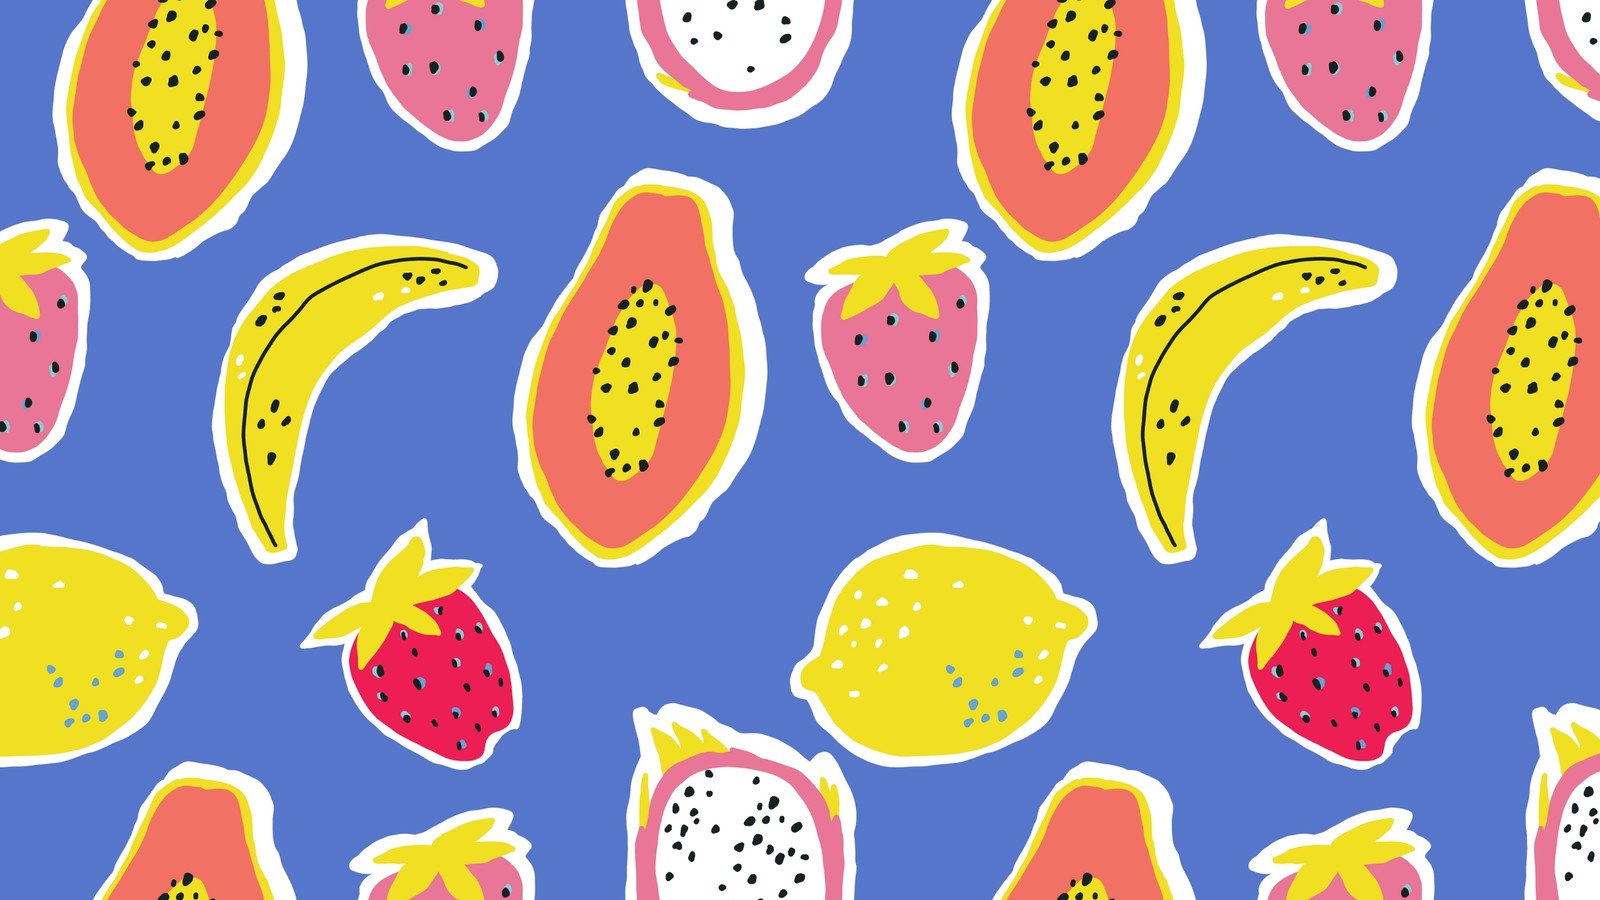 Pin by Daria Russkikh on Wallpapers  Fruit wallpaper Summer wallpaper  Cute patterns wallpaper